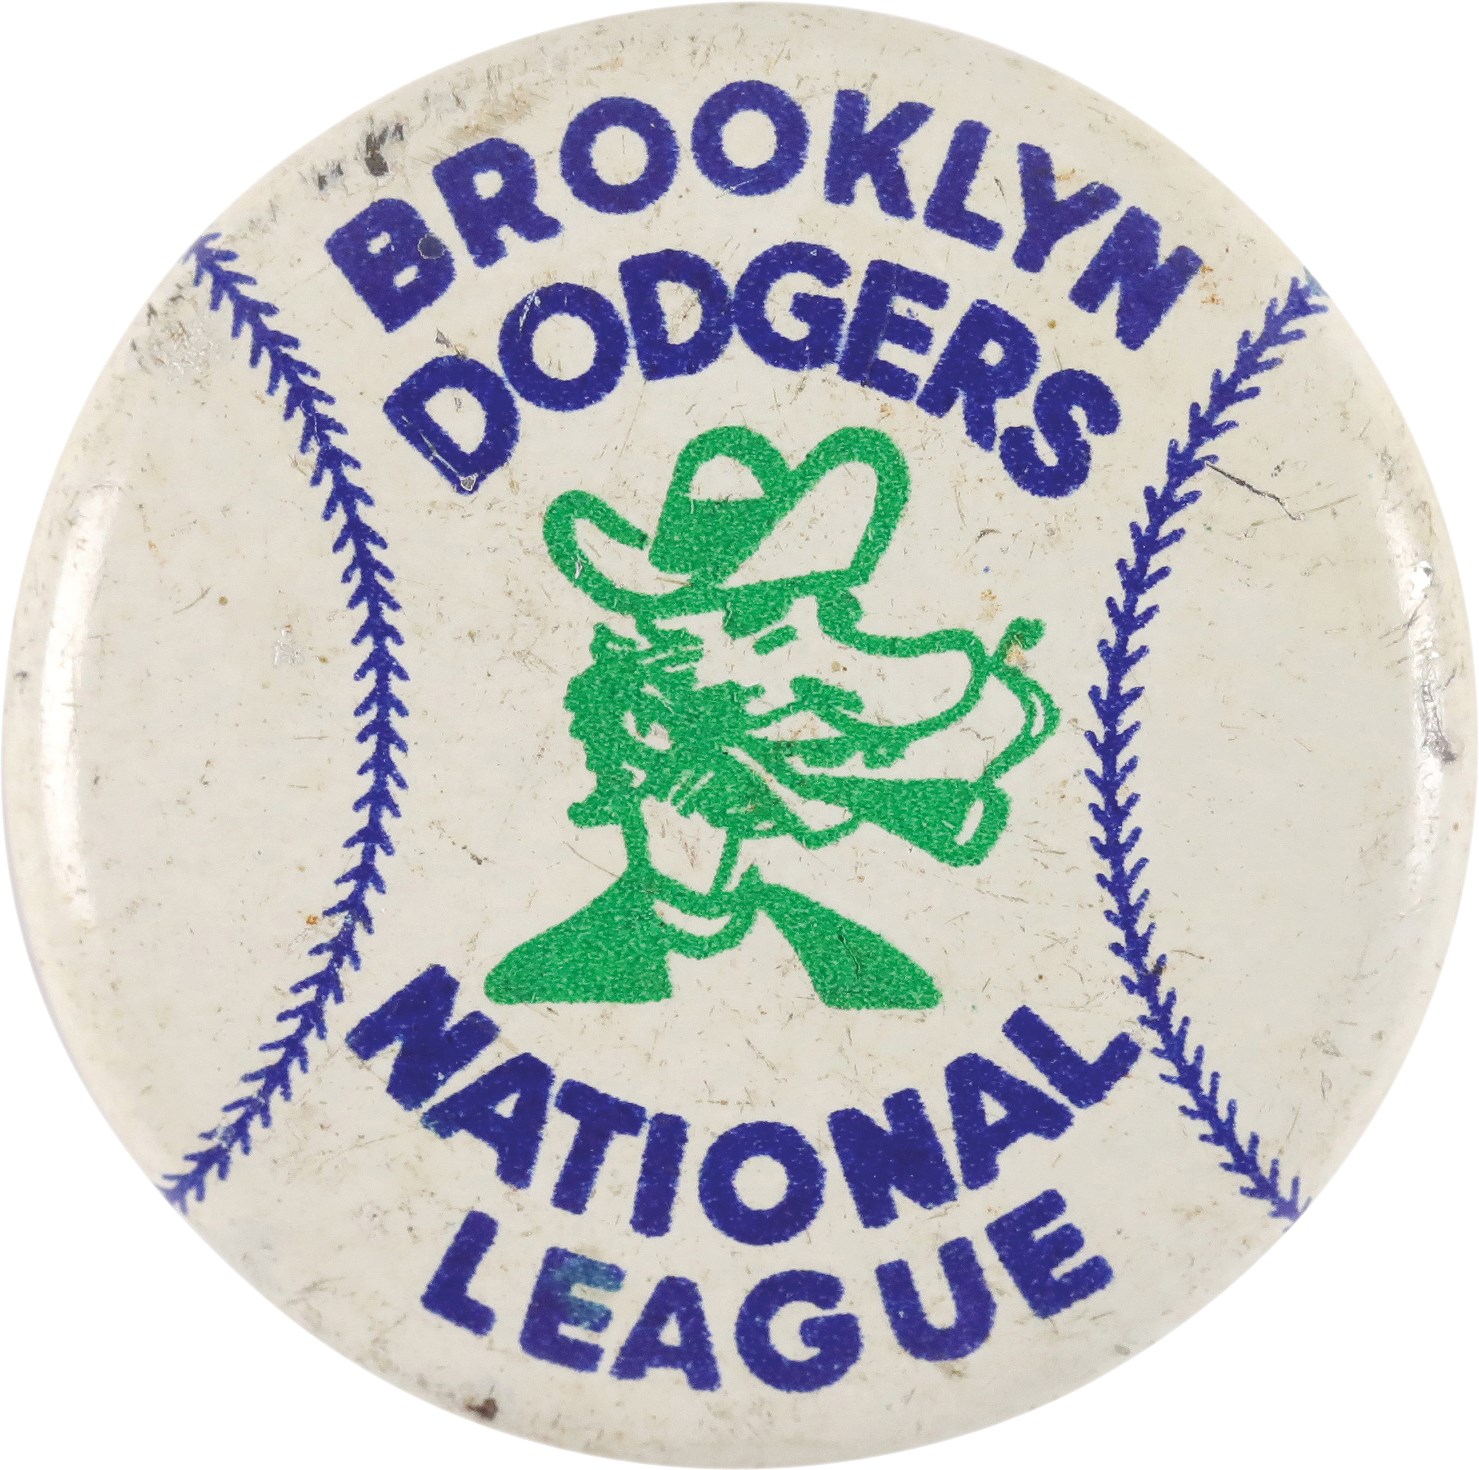 - Newly Discovered Brooklyn Dodgers "Bum" Pin